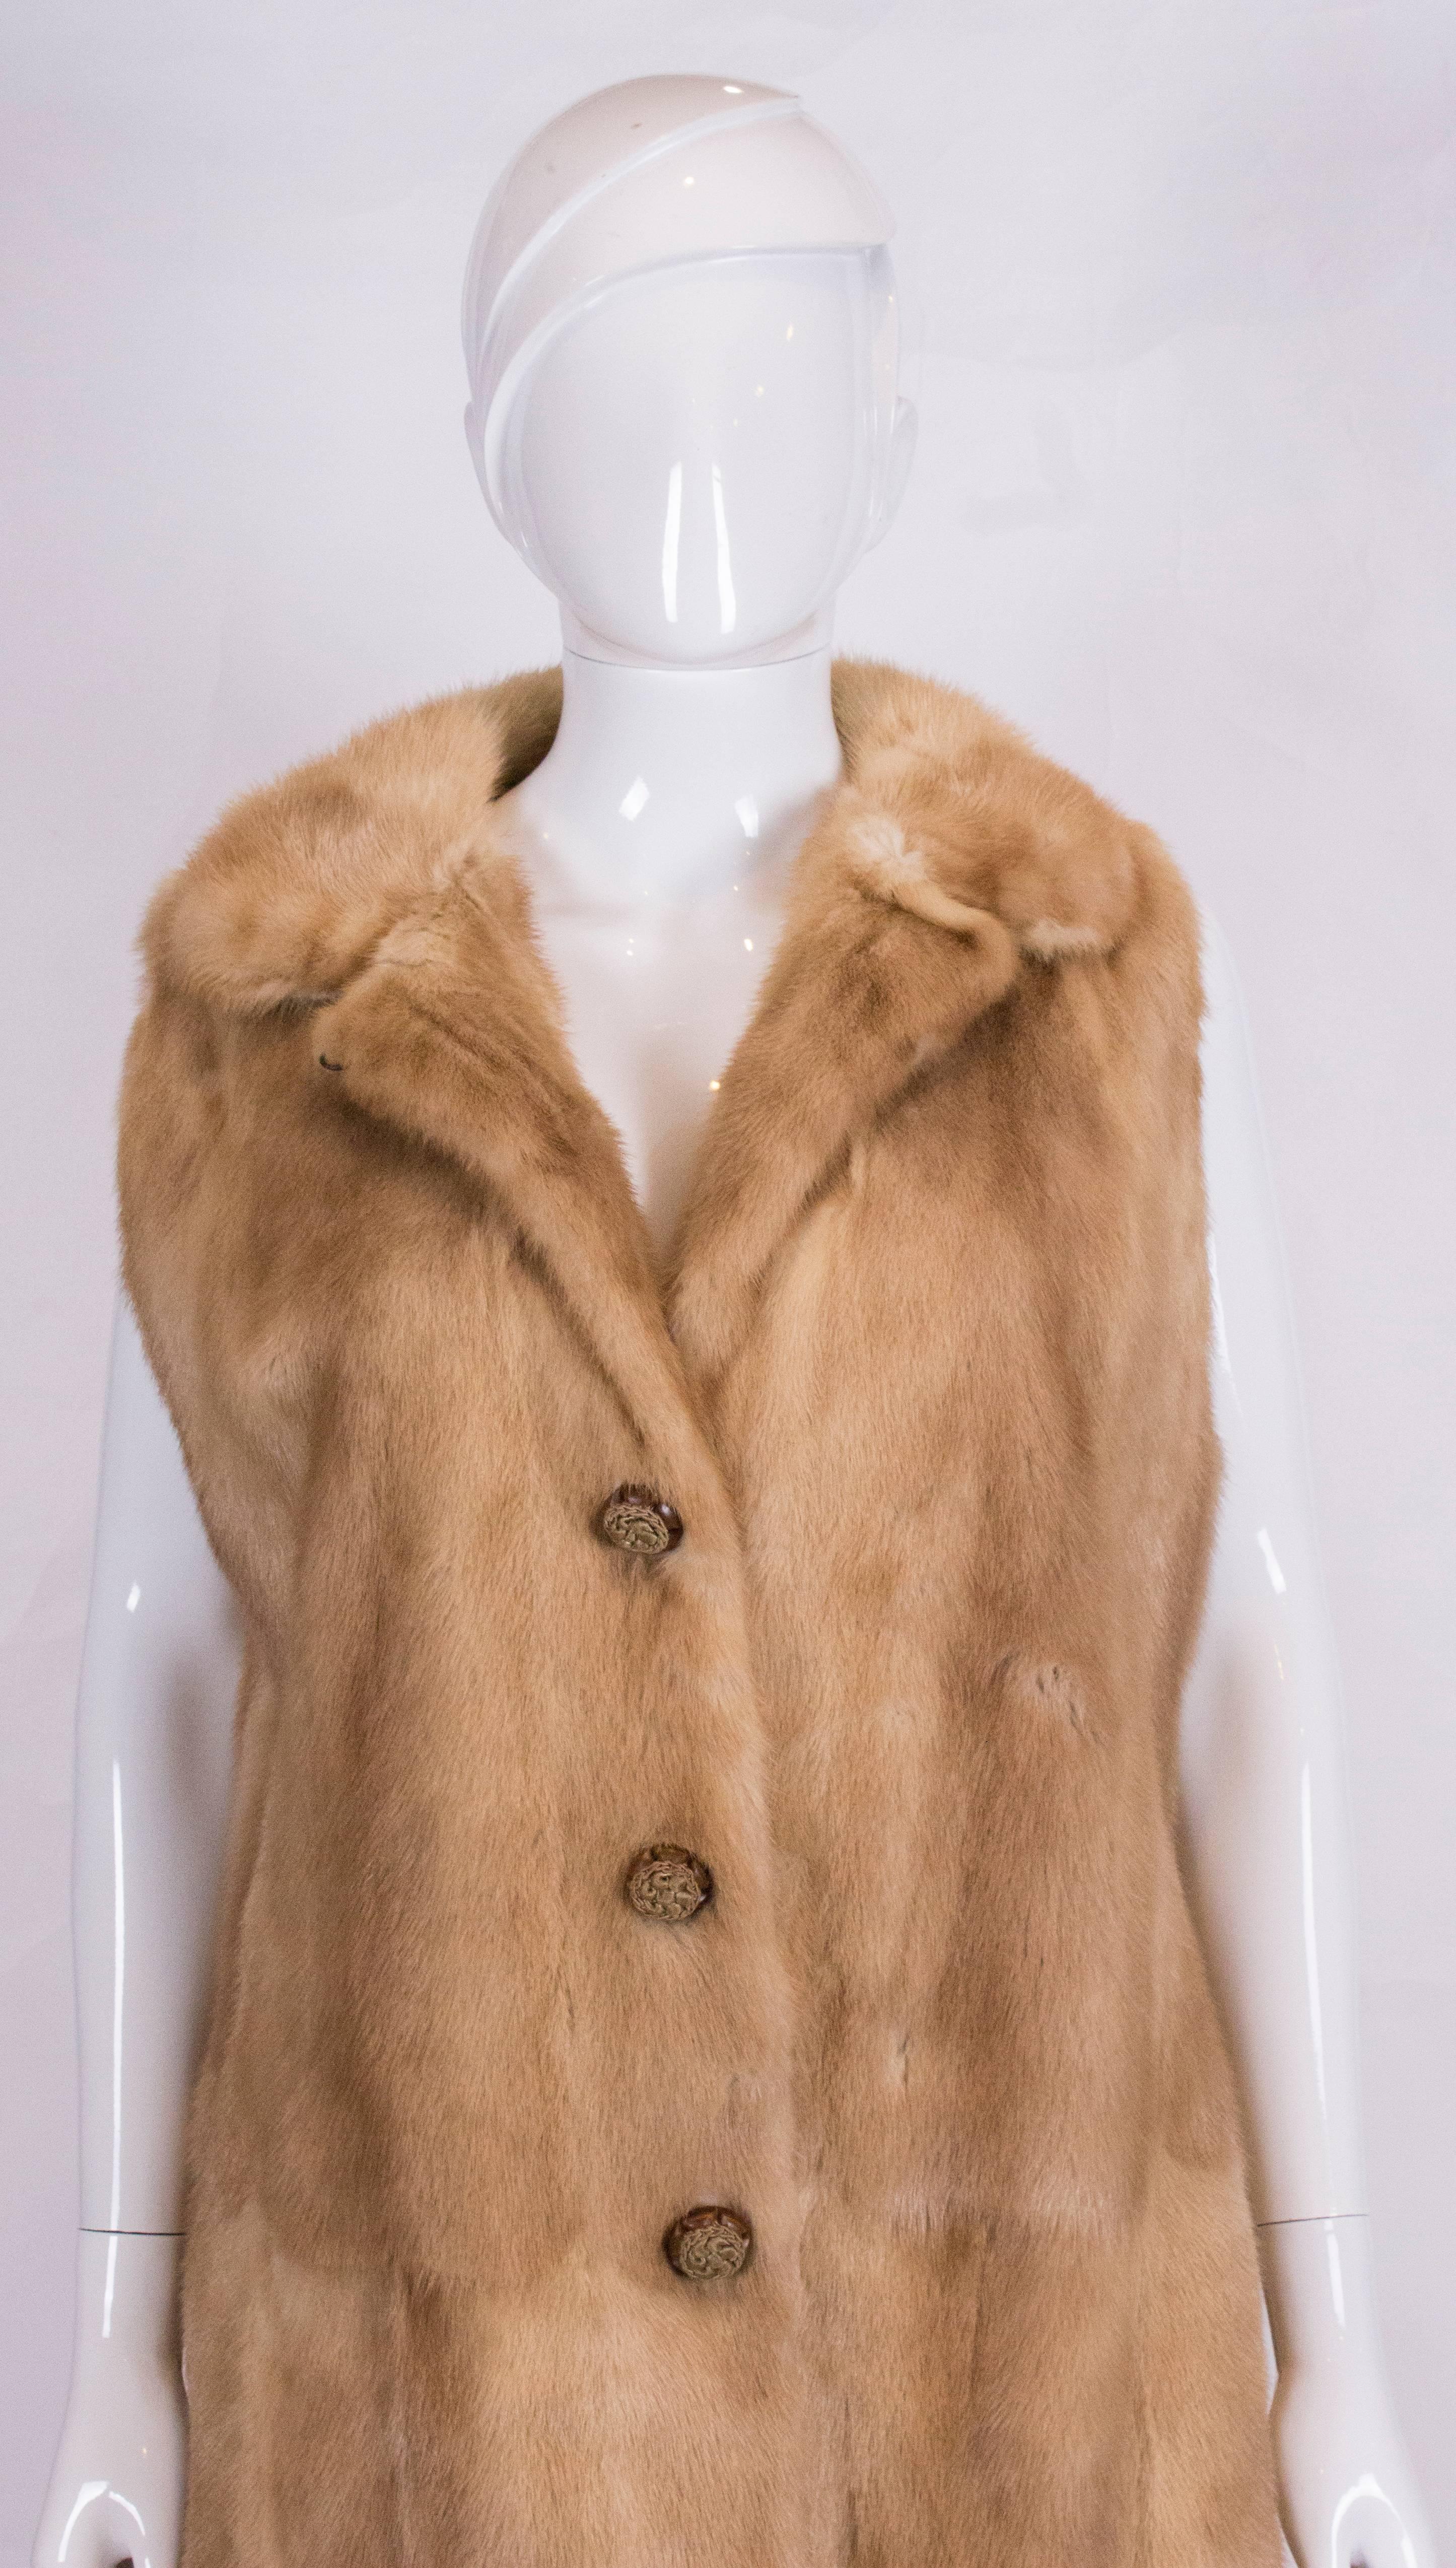 A great vintage  mink gilet, ideal for Fall/Winter. The gilet is a honey coloured mink, with a 3 button opening, and pockets on either side.